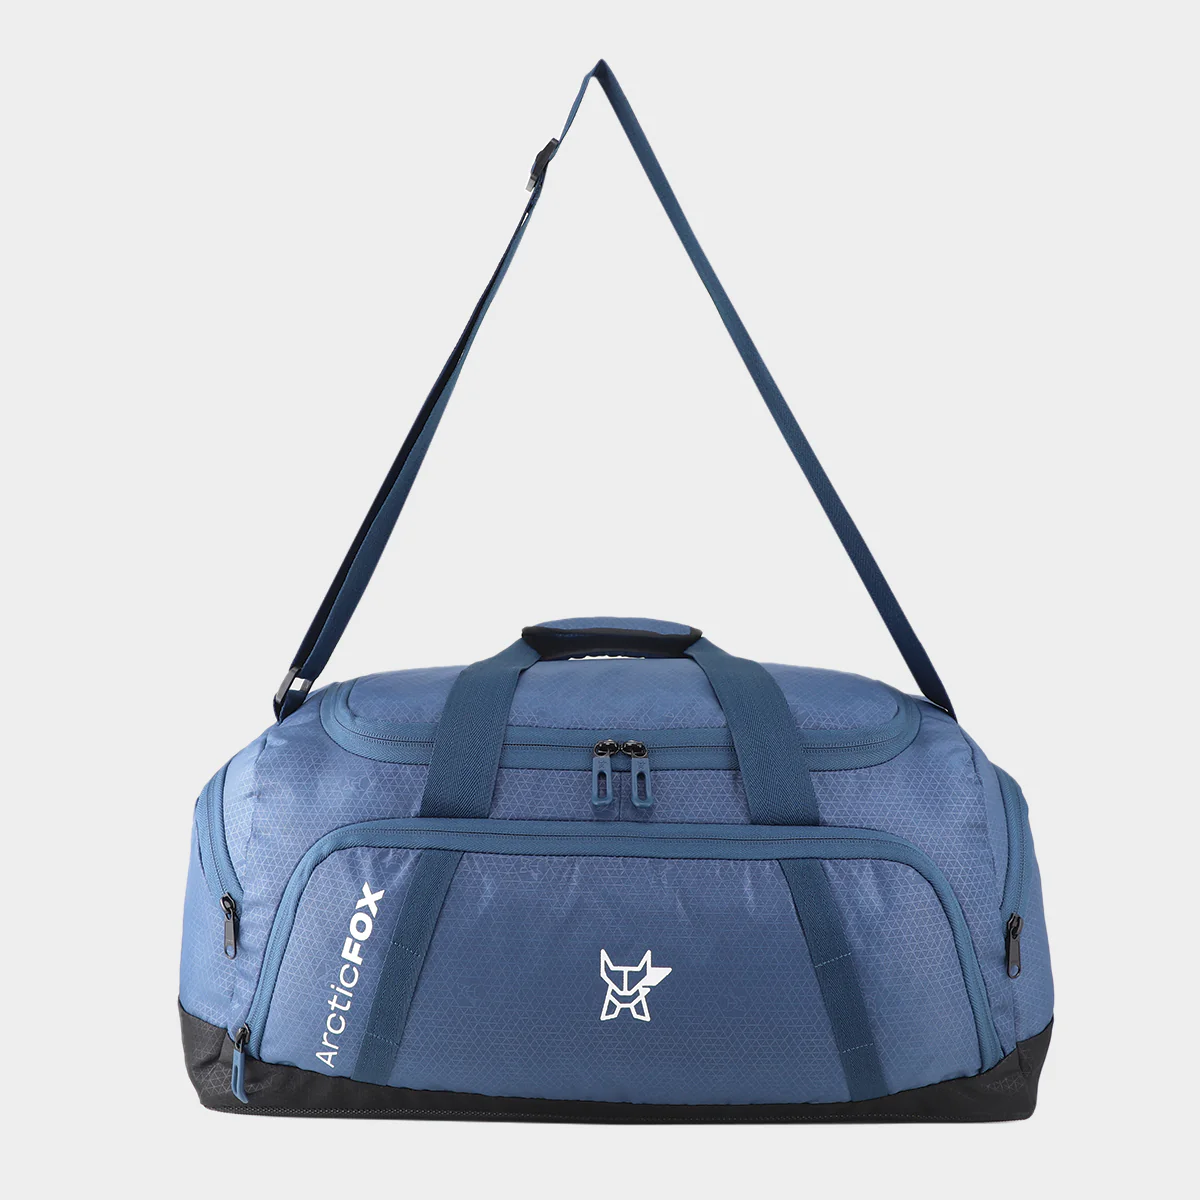 Skybags Cardiff Polyester 55 cms Blue Travel Duffle DFCAR55BLU - YouTube